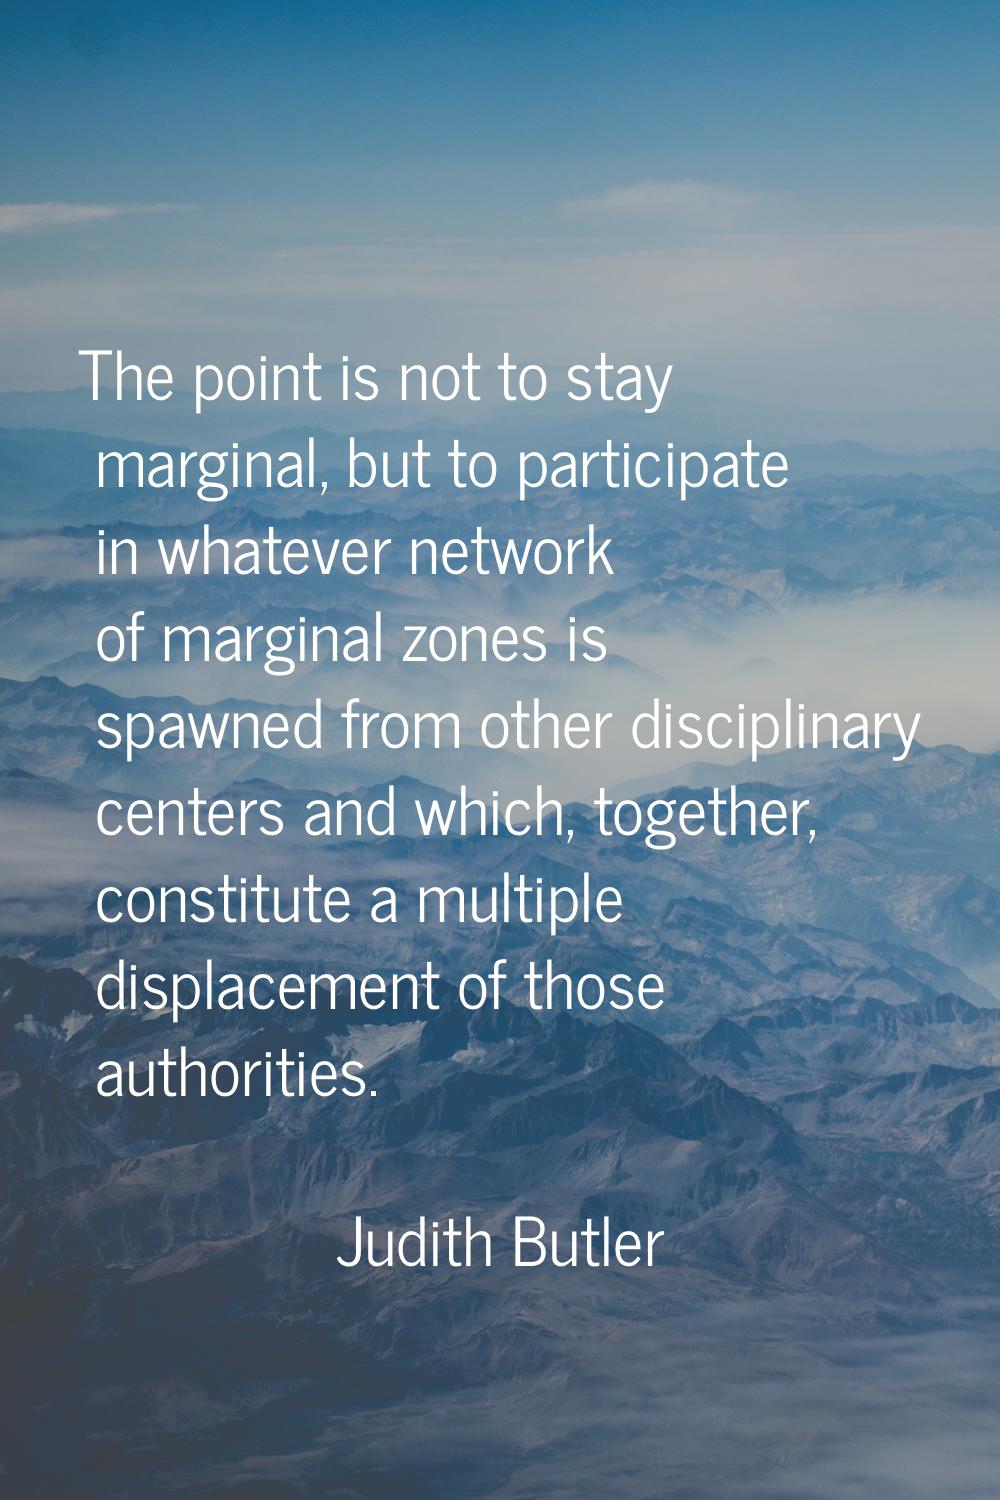 The point is not to stay marginal, but to participate in whatever network of marginal zones is spaw